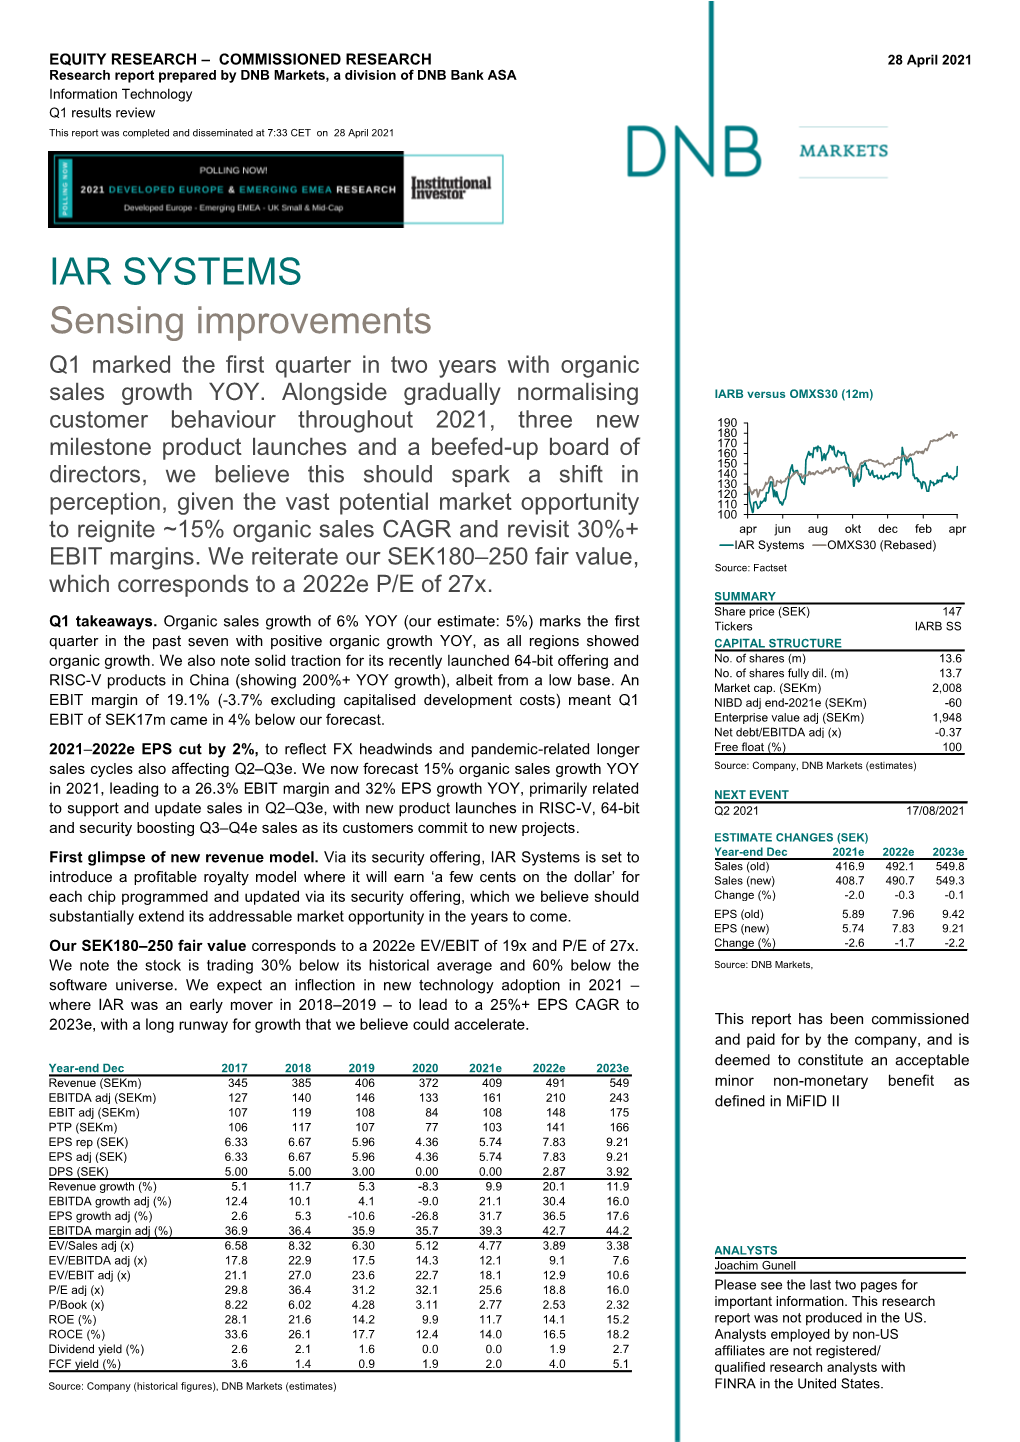 IAR SYSTEMS Sensing Improvements Q1 Marked the First Quarter in Two Years with Organic Sales Growth YOY